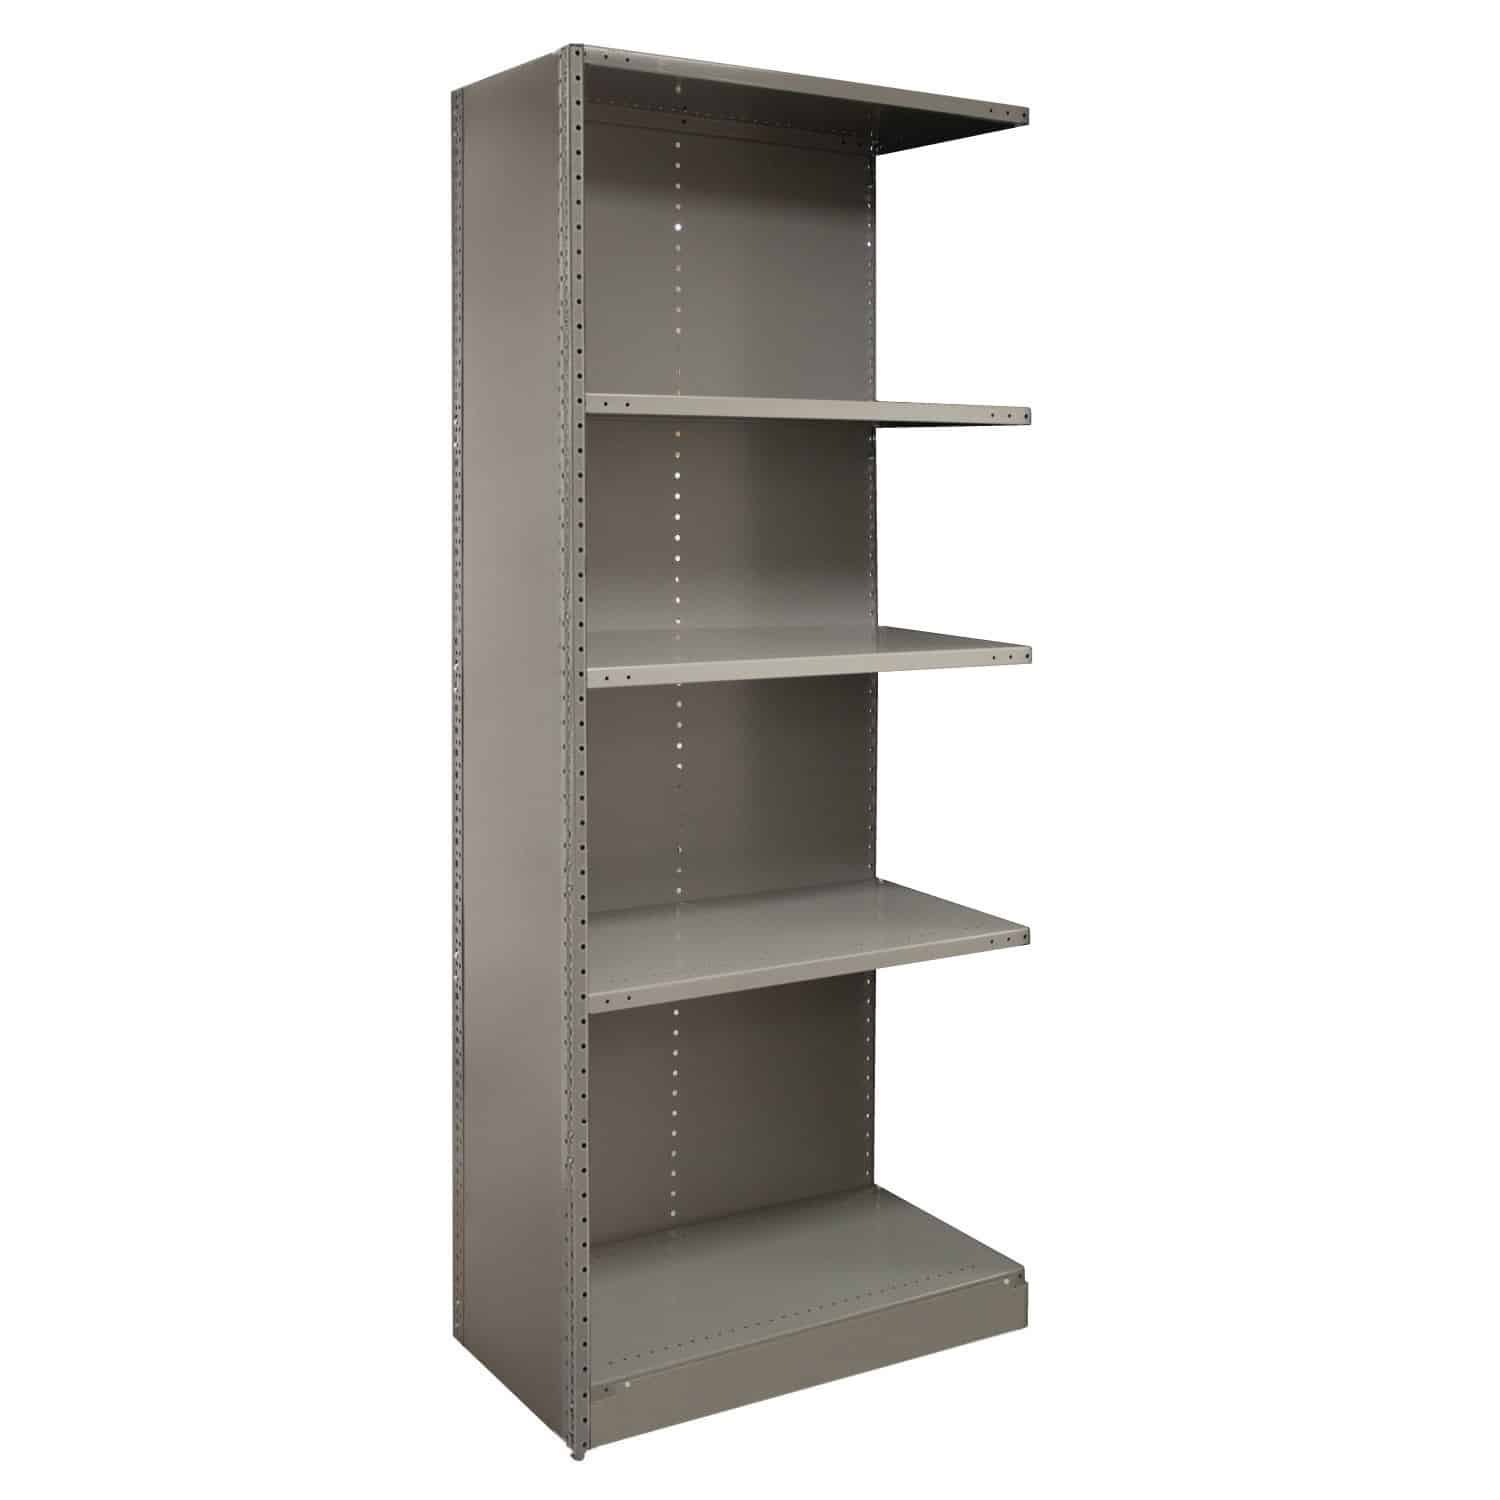 Republic 2000 Series 36 Inch Wide 5 Shelf Angle Post Closed Shelving Add-On